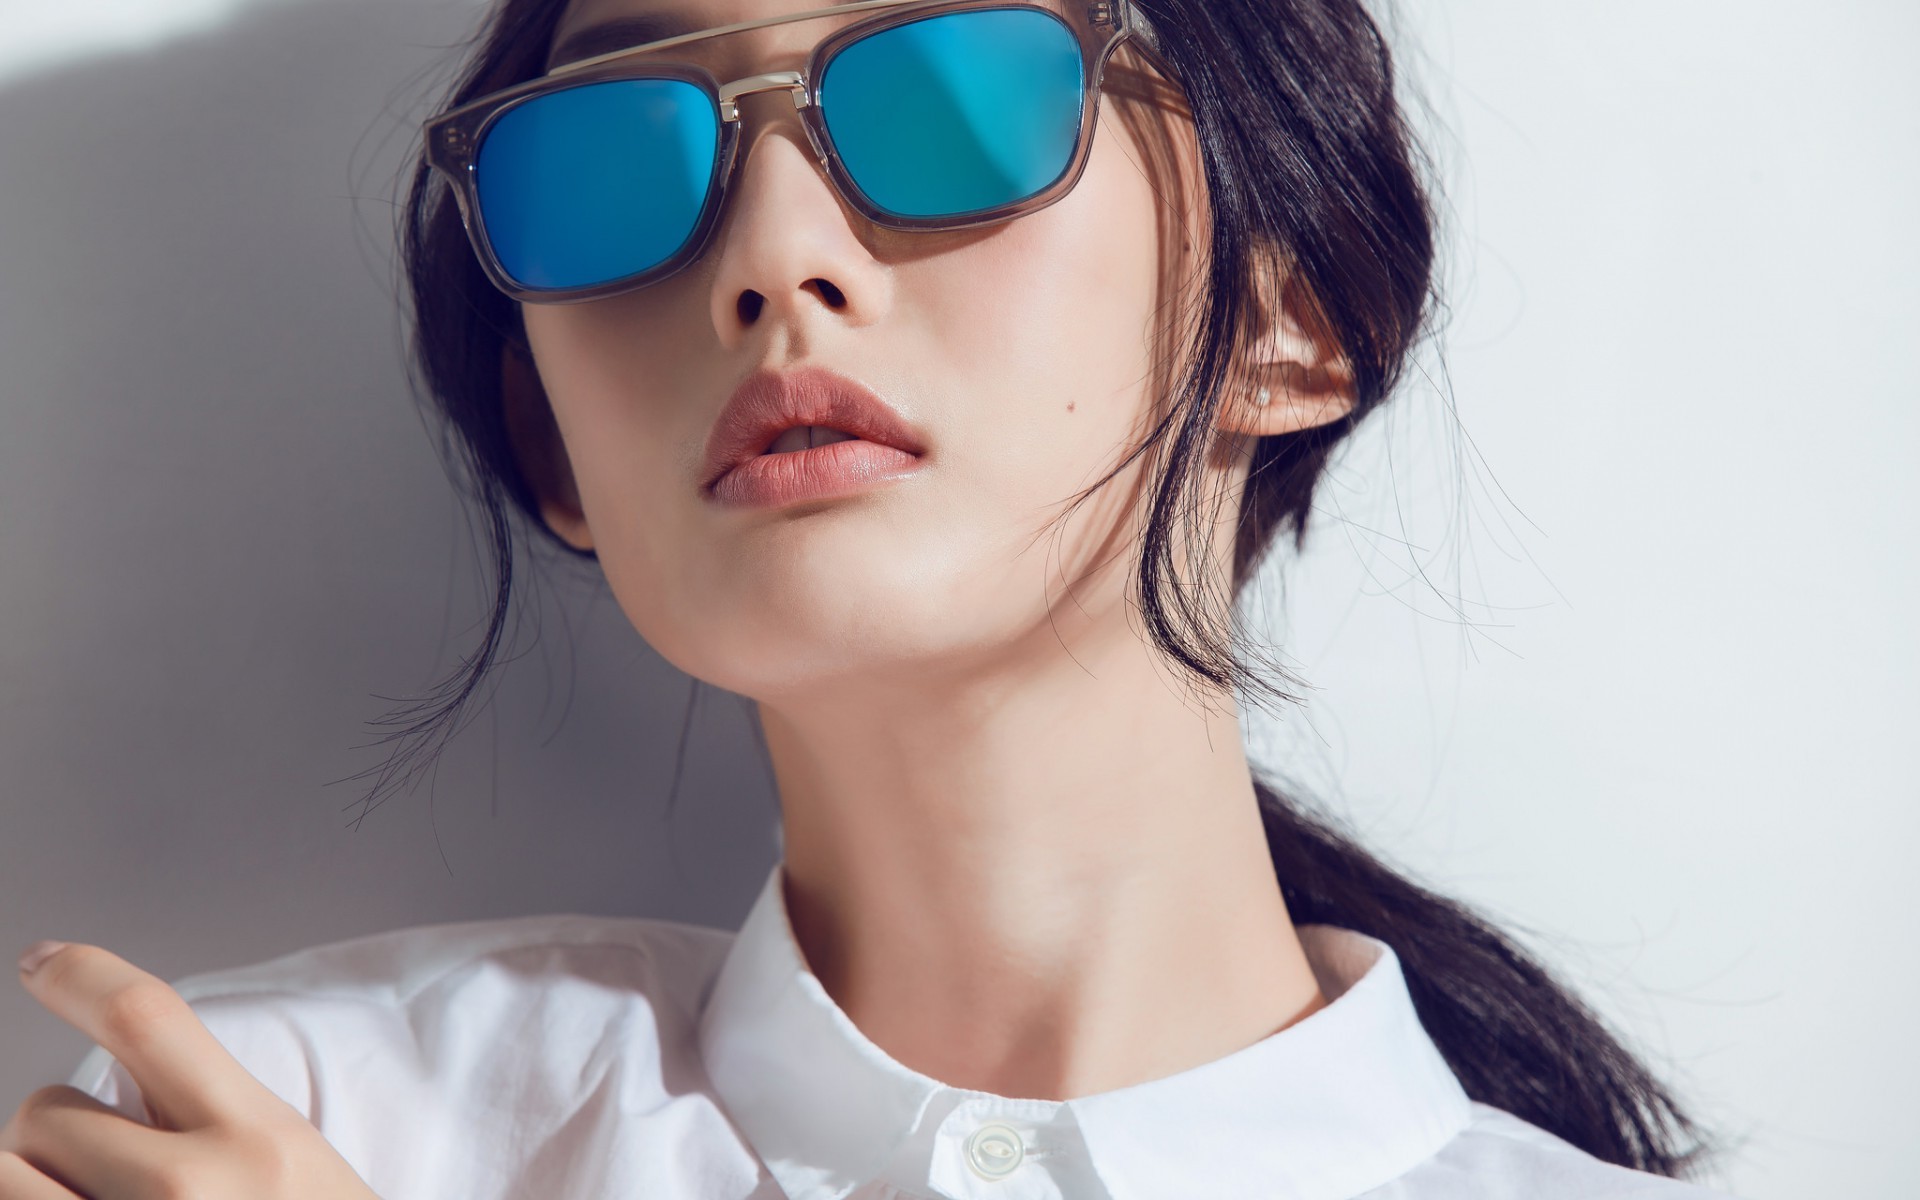 Stylish Asian Girl With Cool Glasses Wallpaper 00868 - Baltana